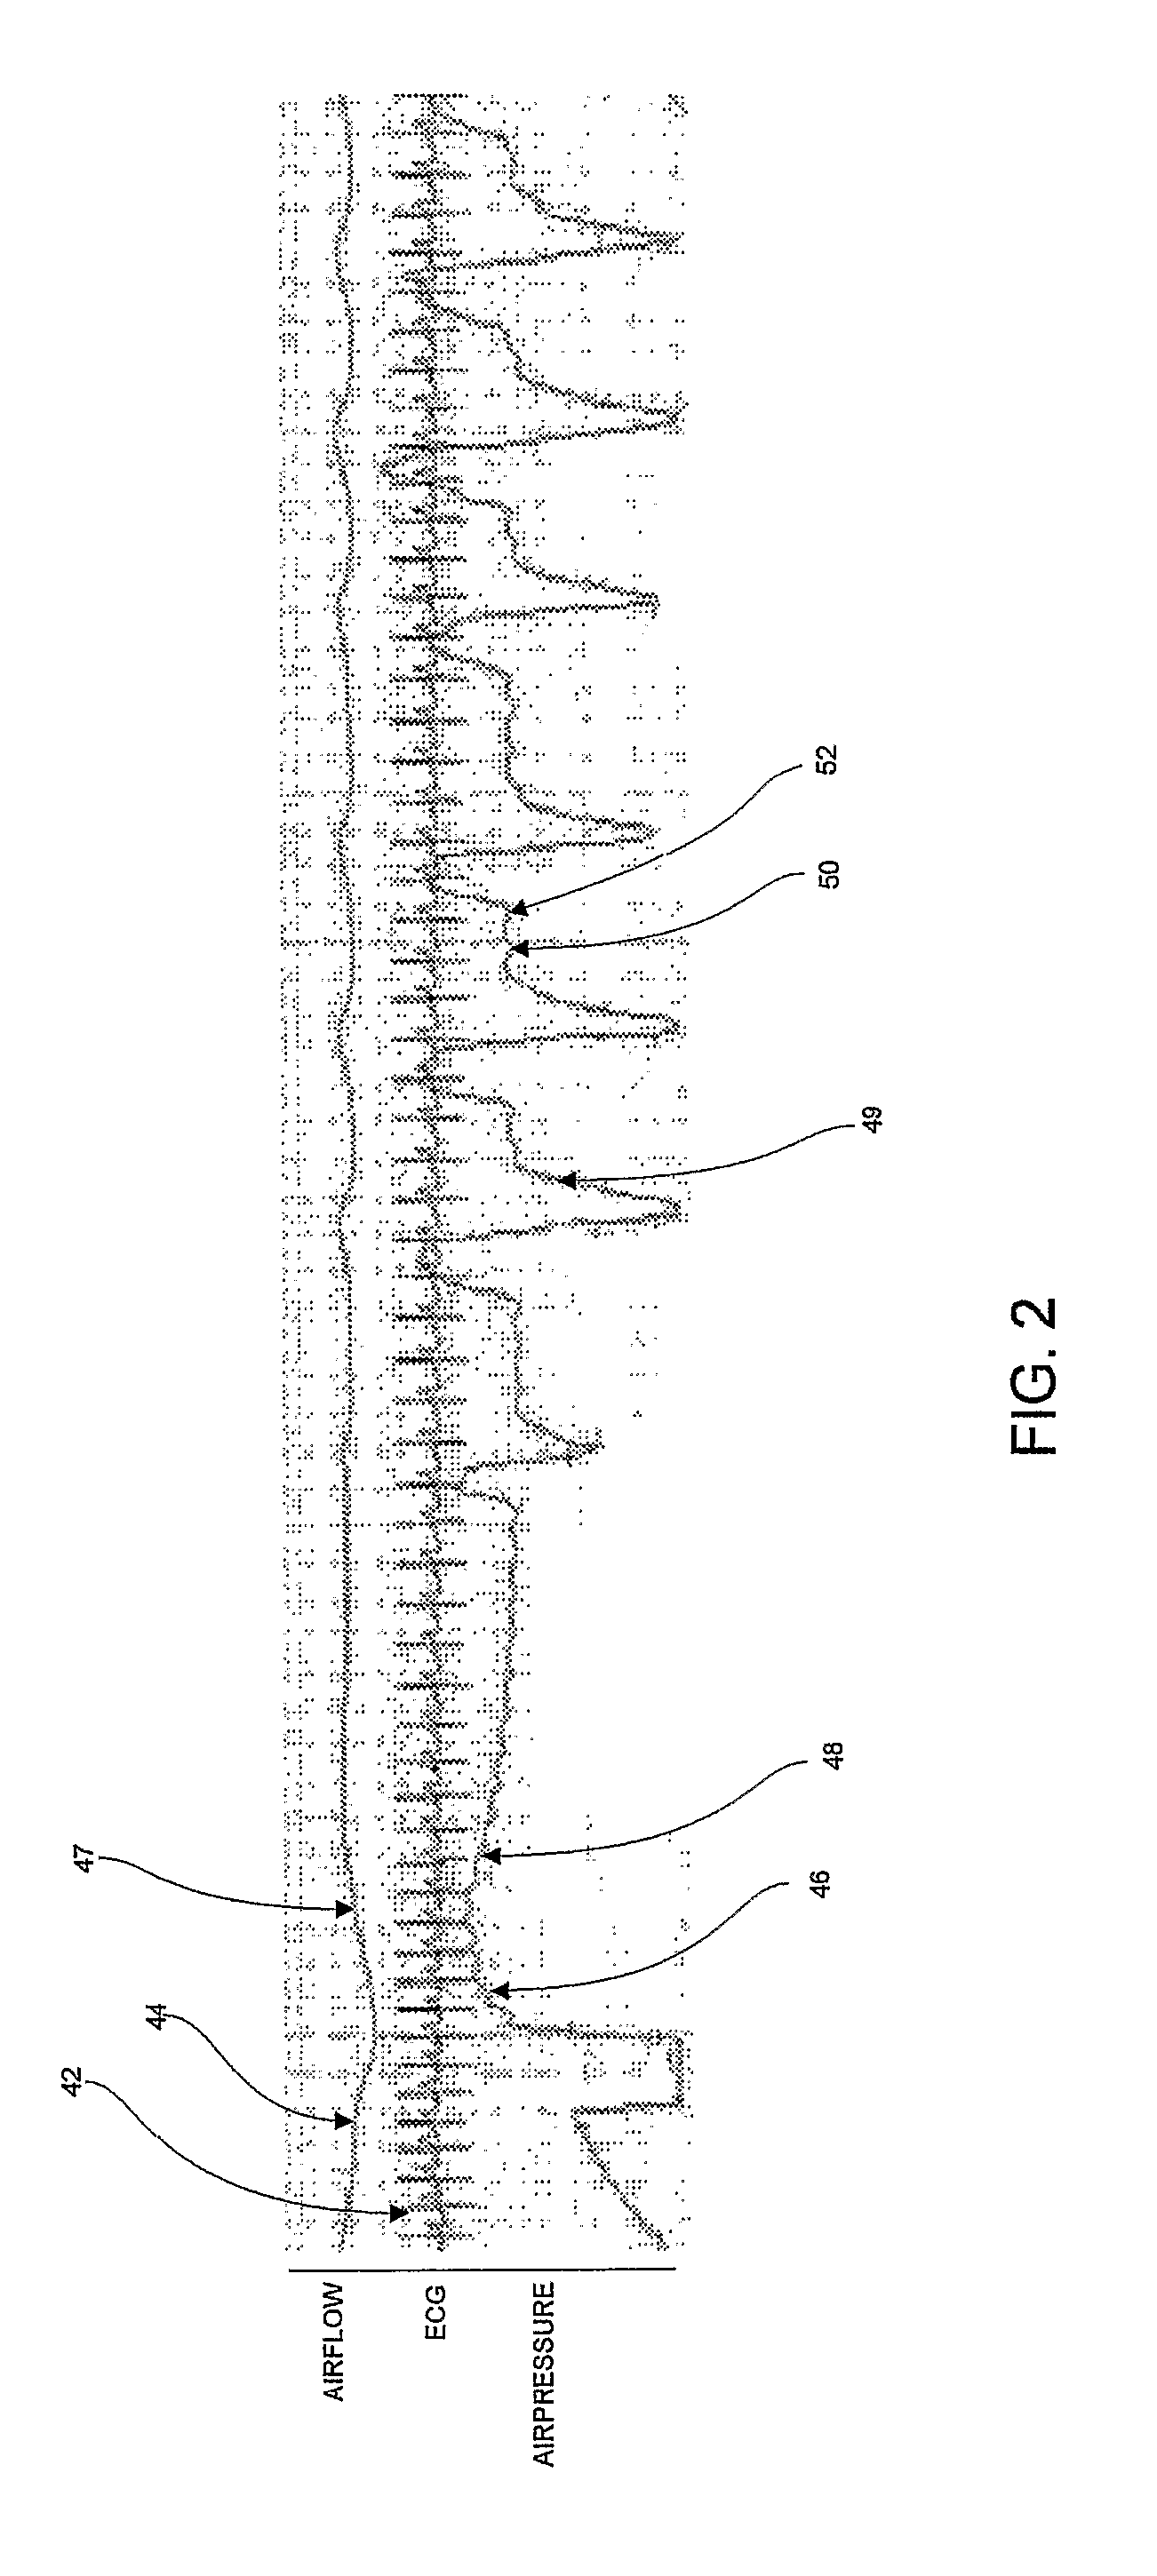 Cardiac monitoring and therapy using a device for providing pressure treatment of sleep disordered breathing